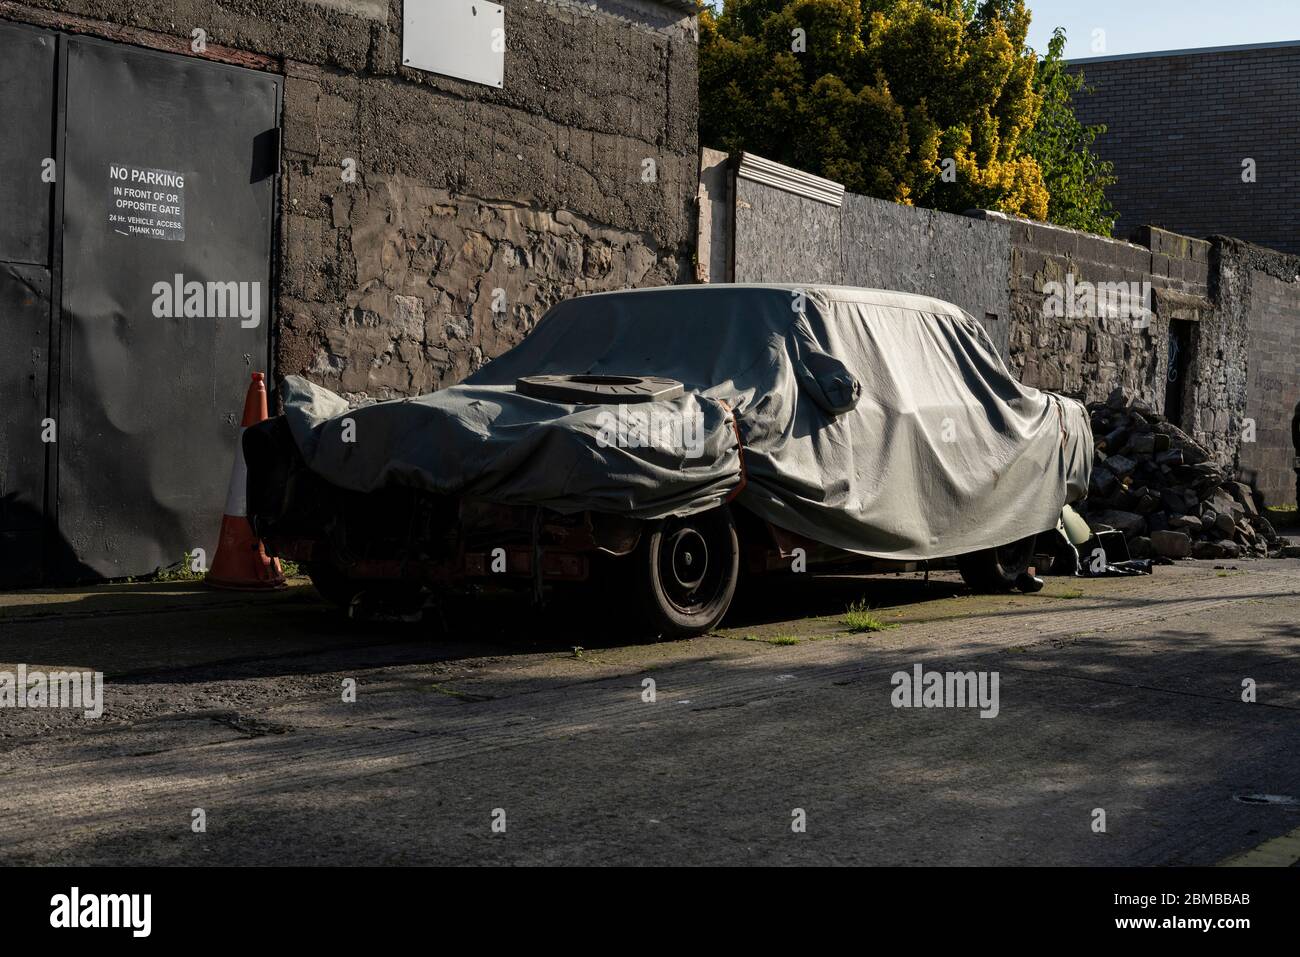 An old car under a cover in a street. Stock Photo